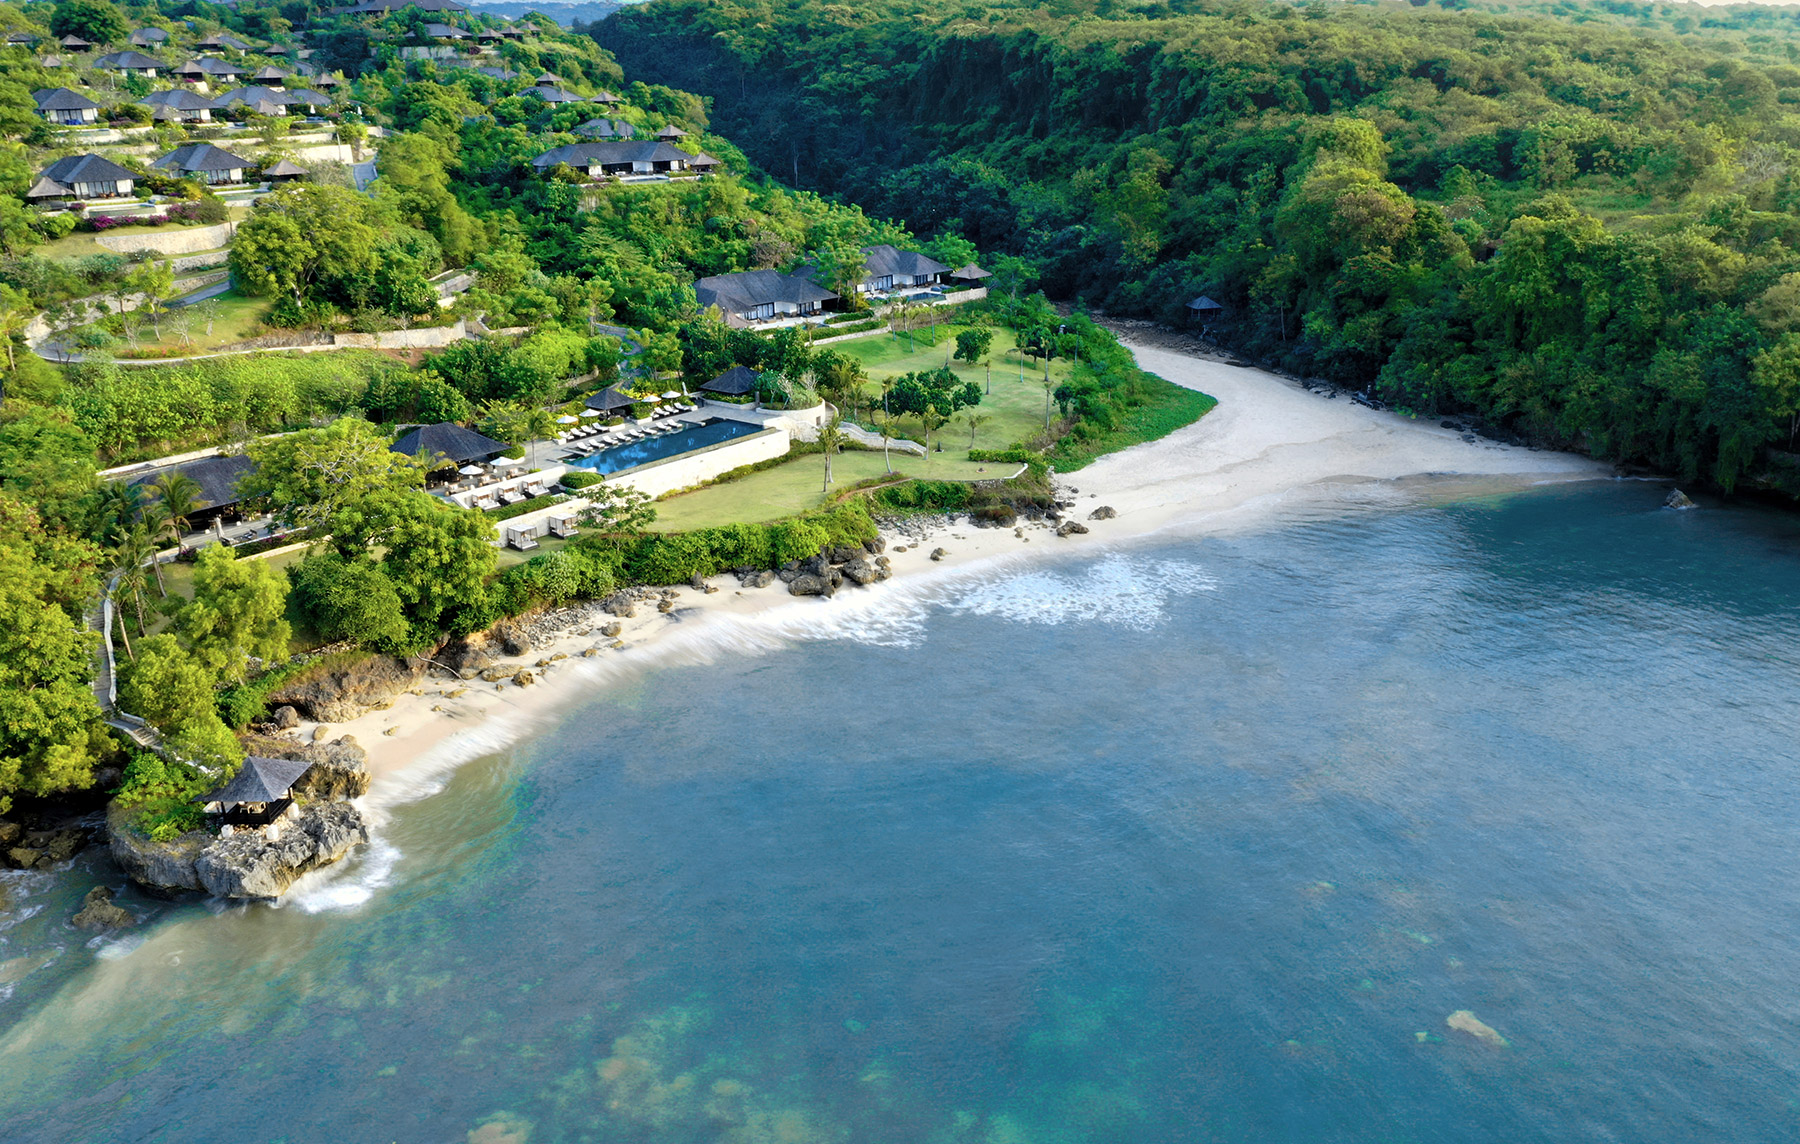 Raffles Bali is the epitome of secluded luxury in Jimbaran’s lush hills